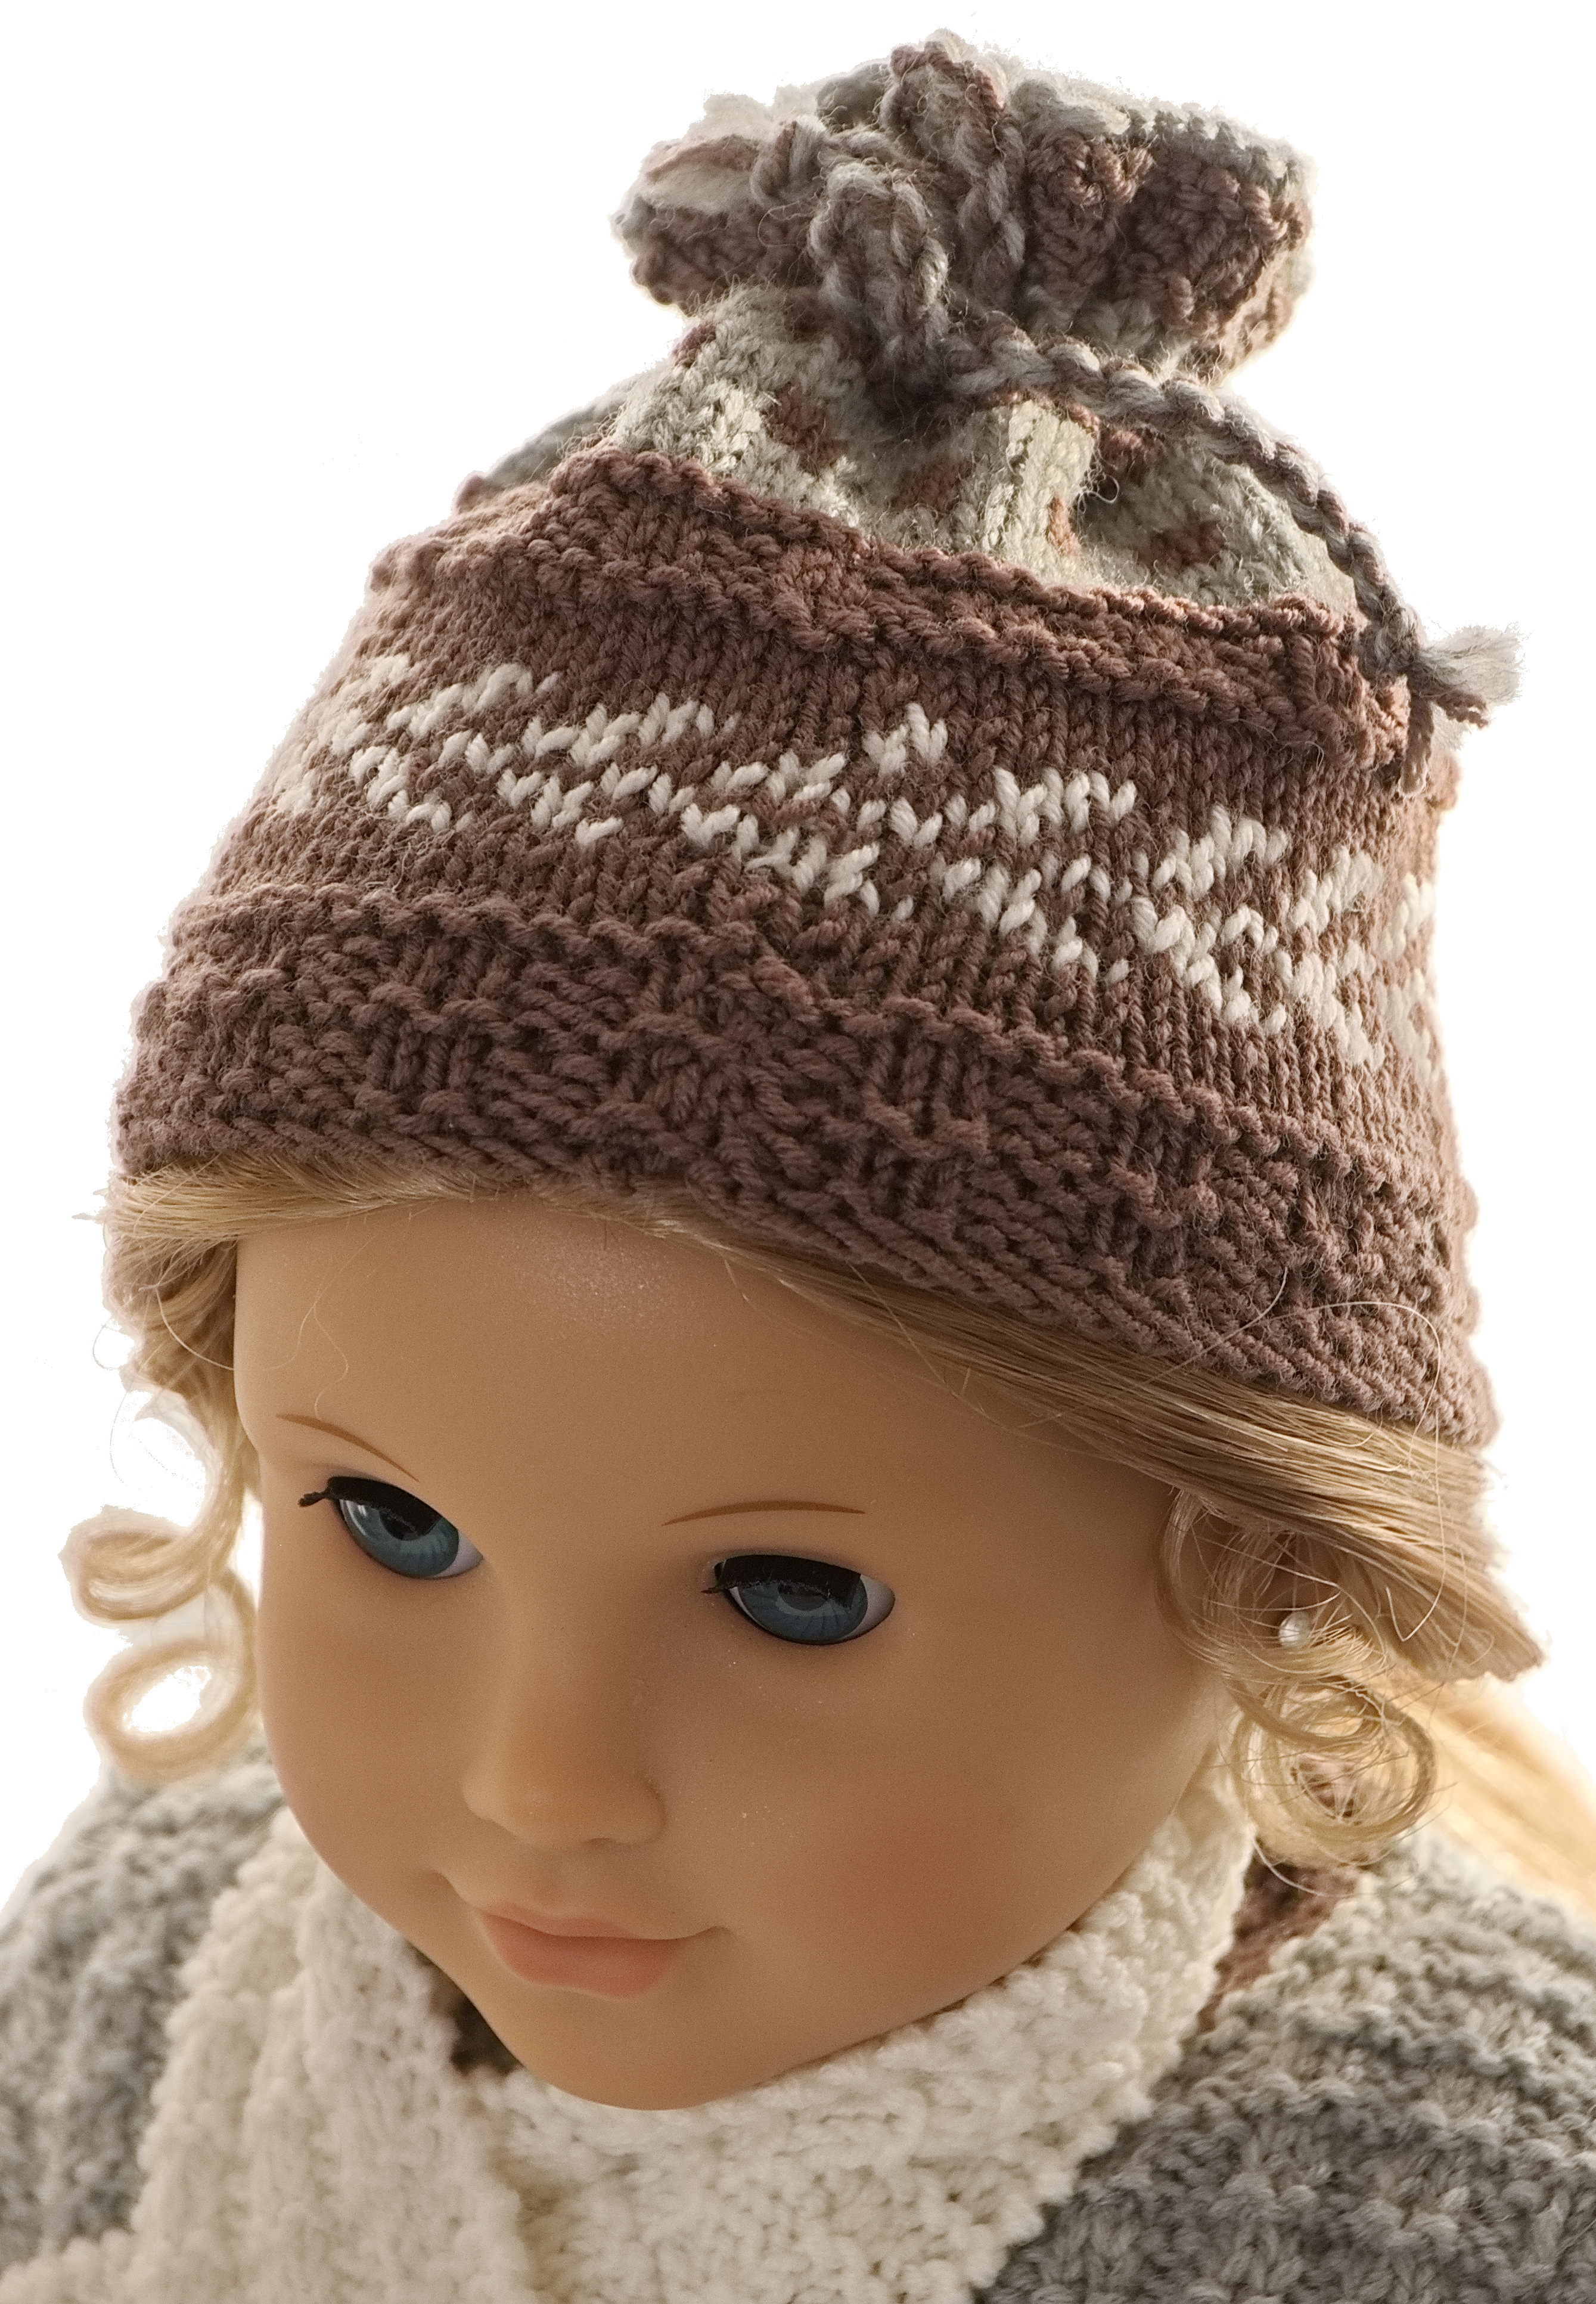 The cap has the same patterns as the knitted for the sweater.